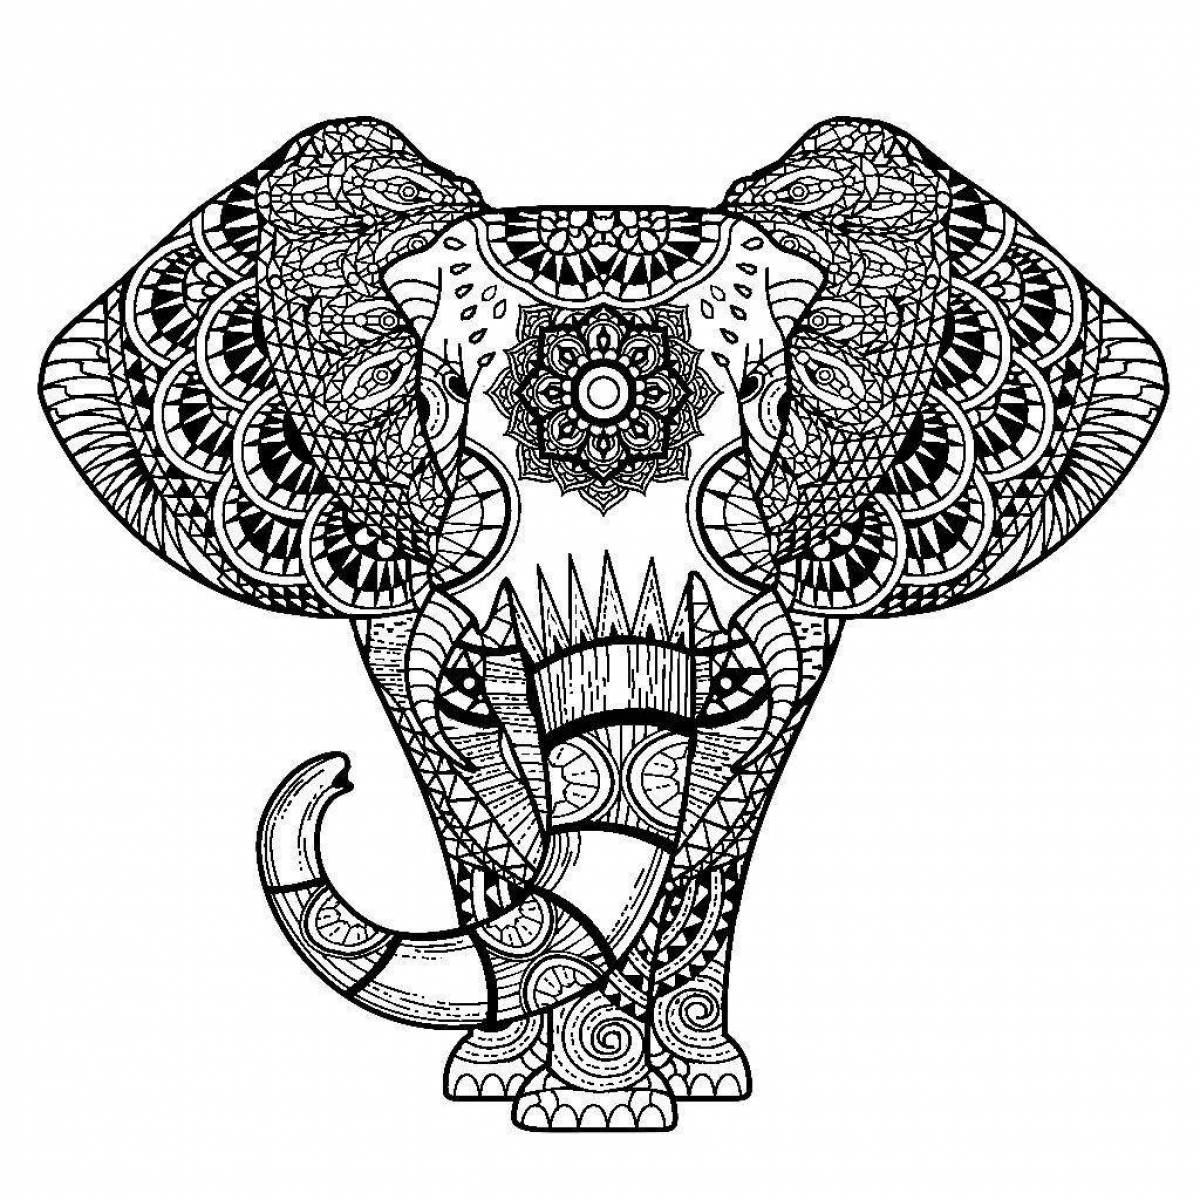 Incredible anti-stress elephant coloring book